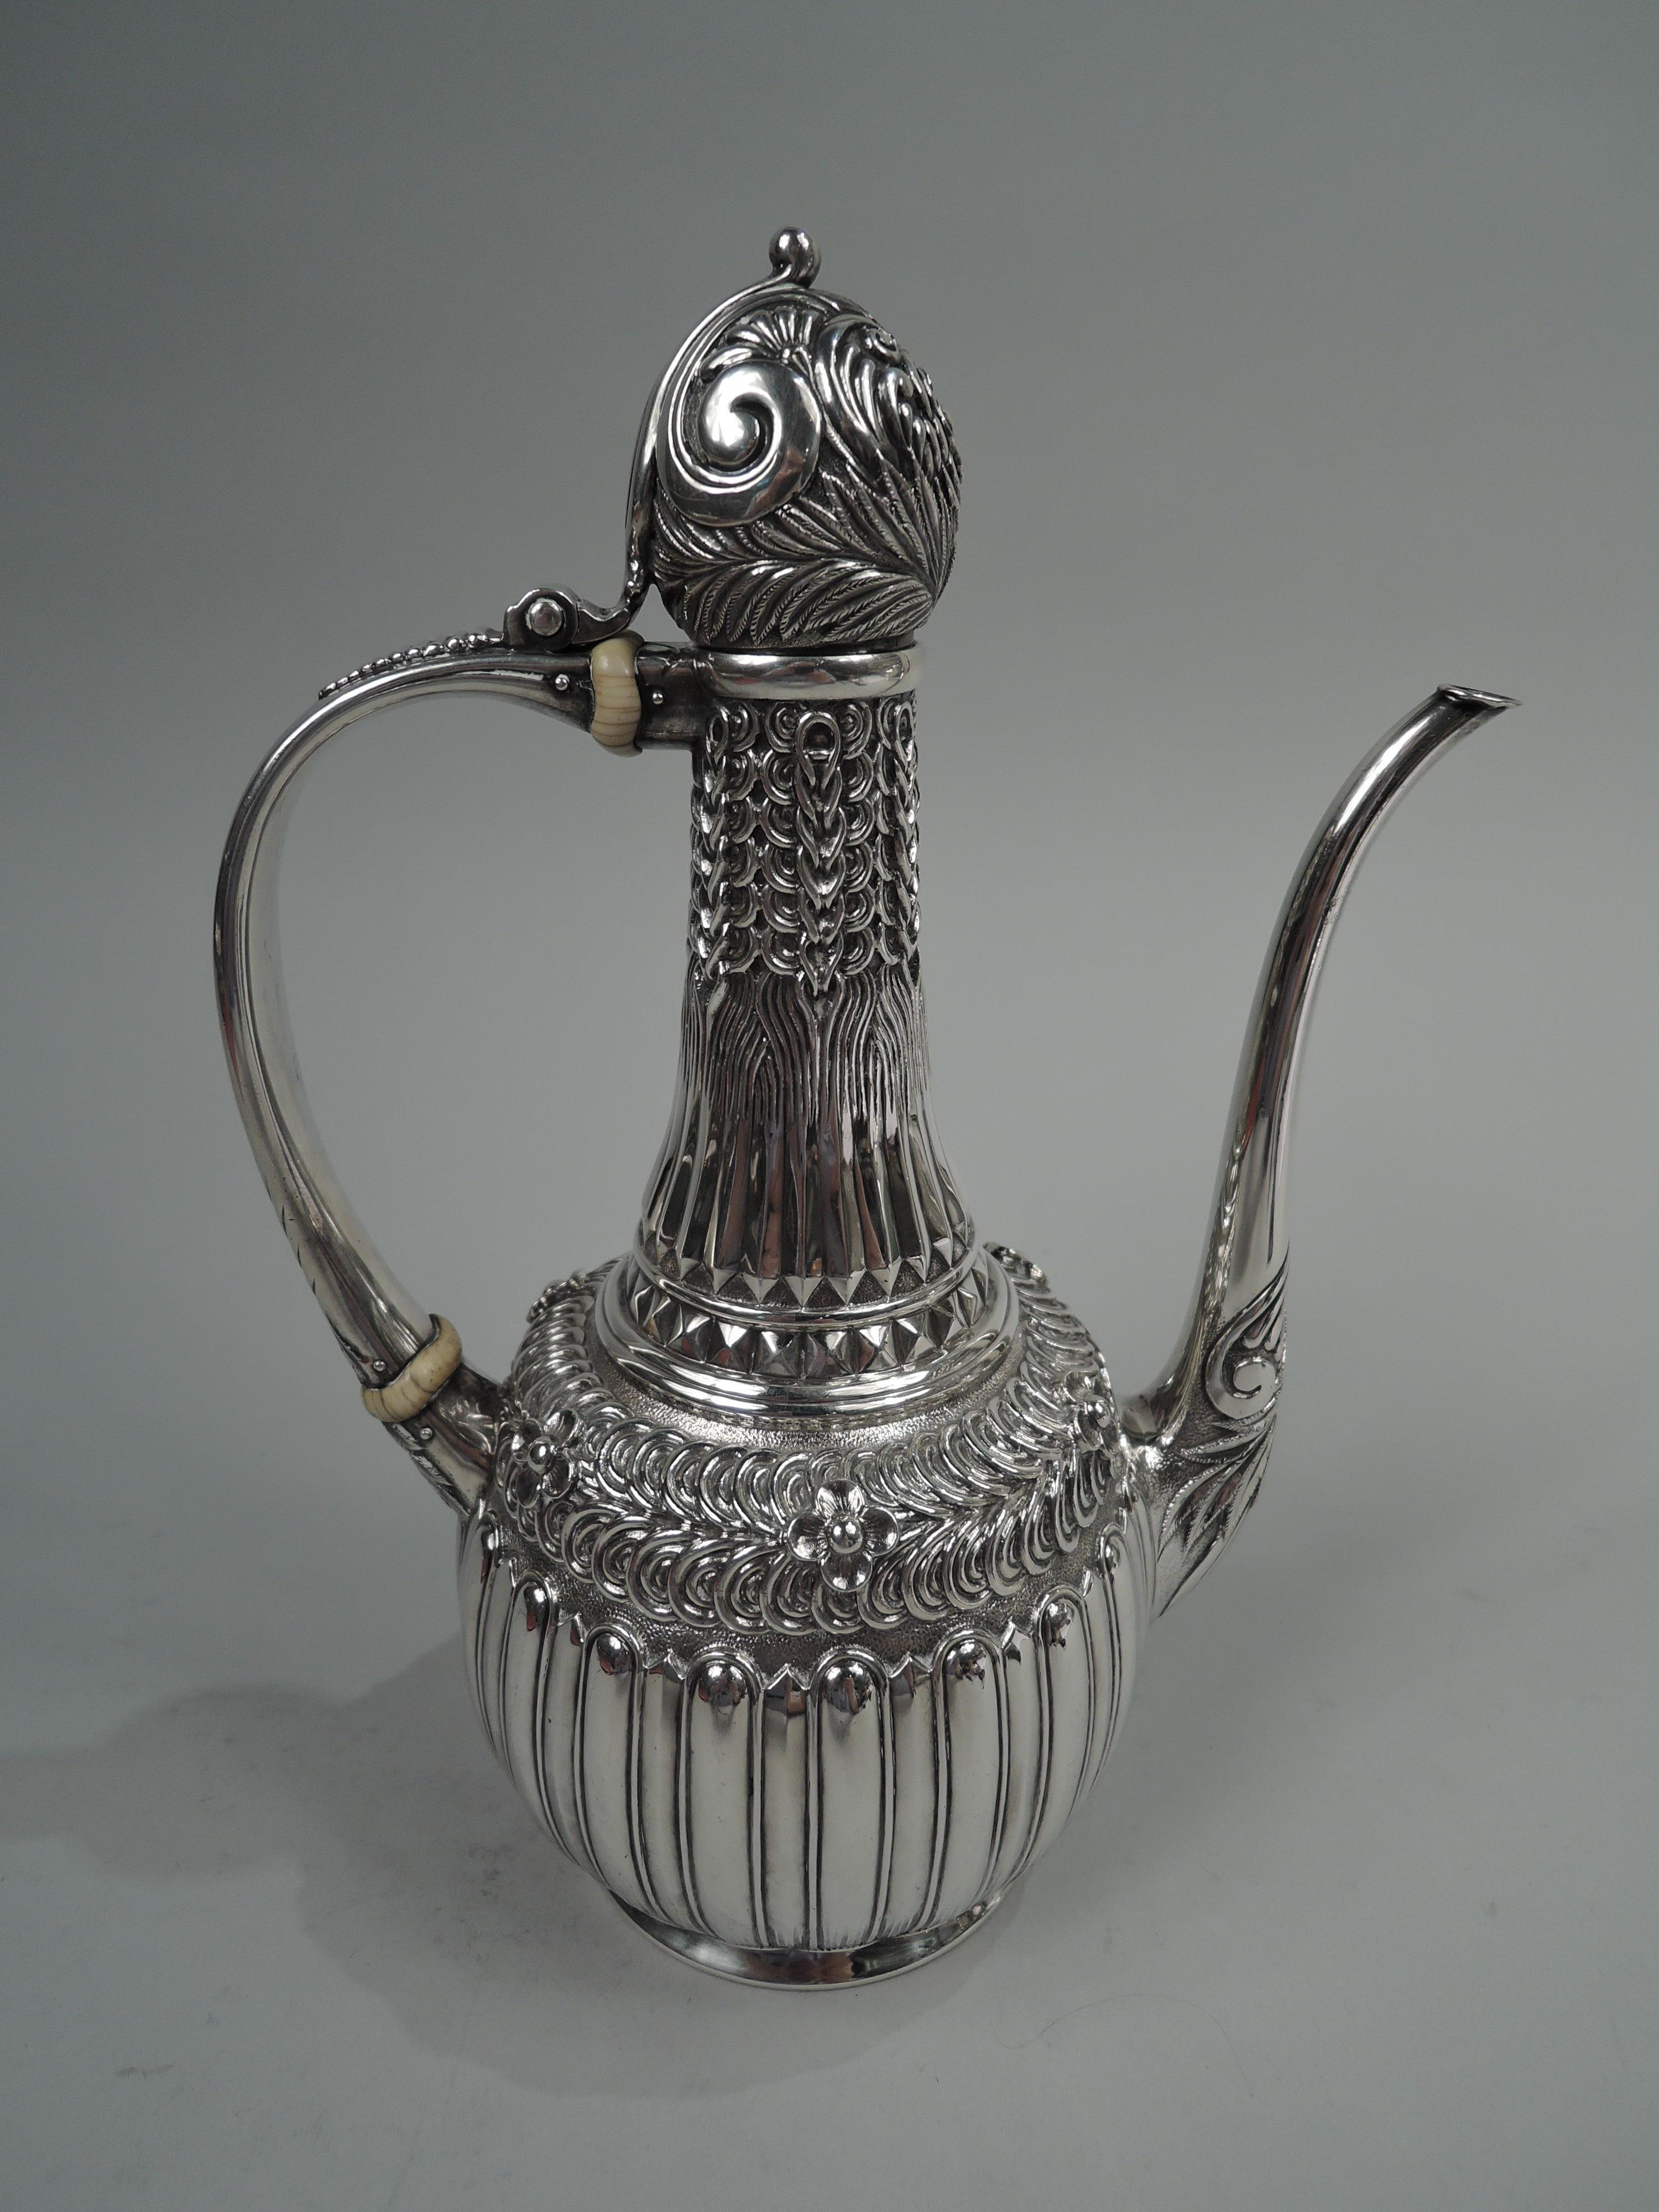 American Antique Tiffany Aesthetic Exotic Sterling Silver Turkish Coffeepot For Sale